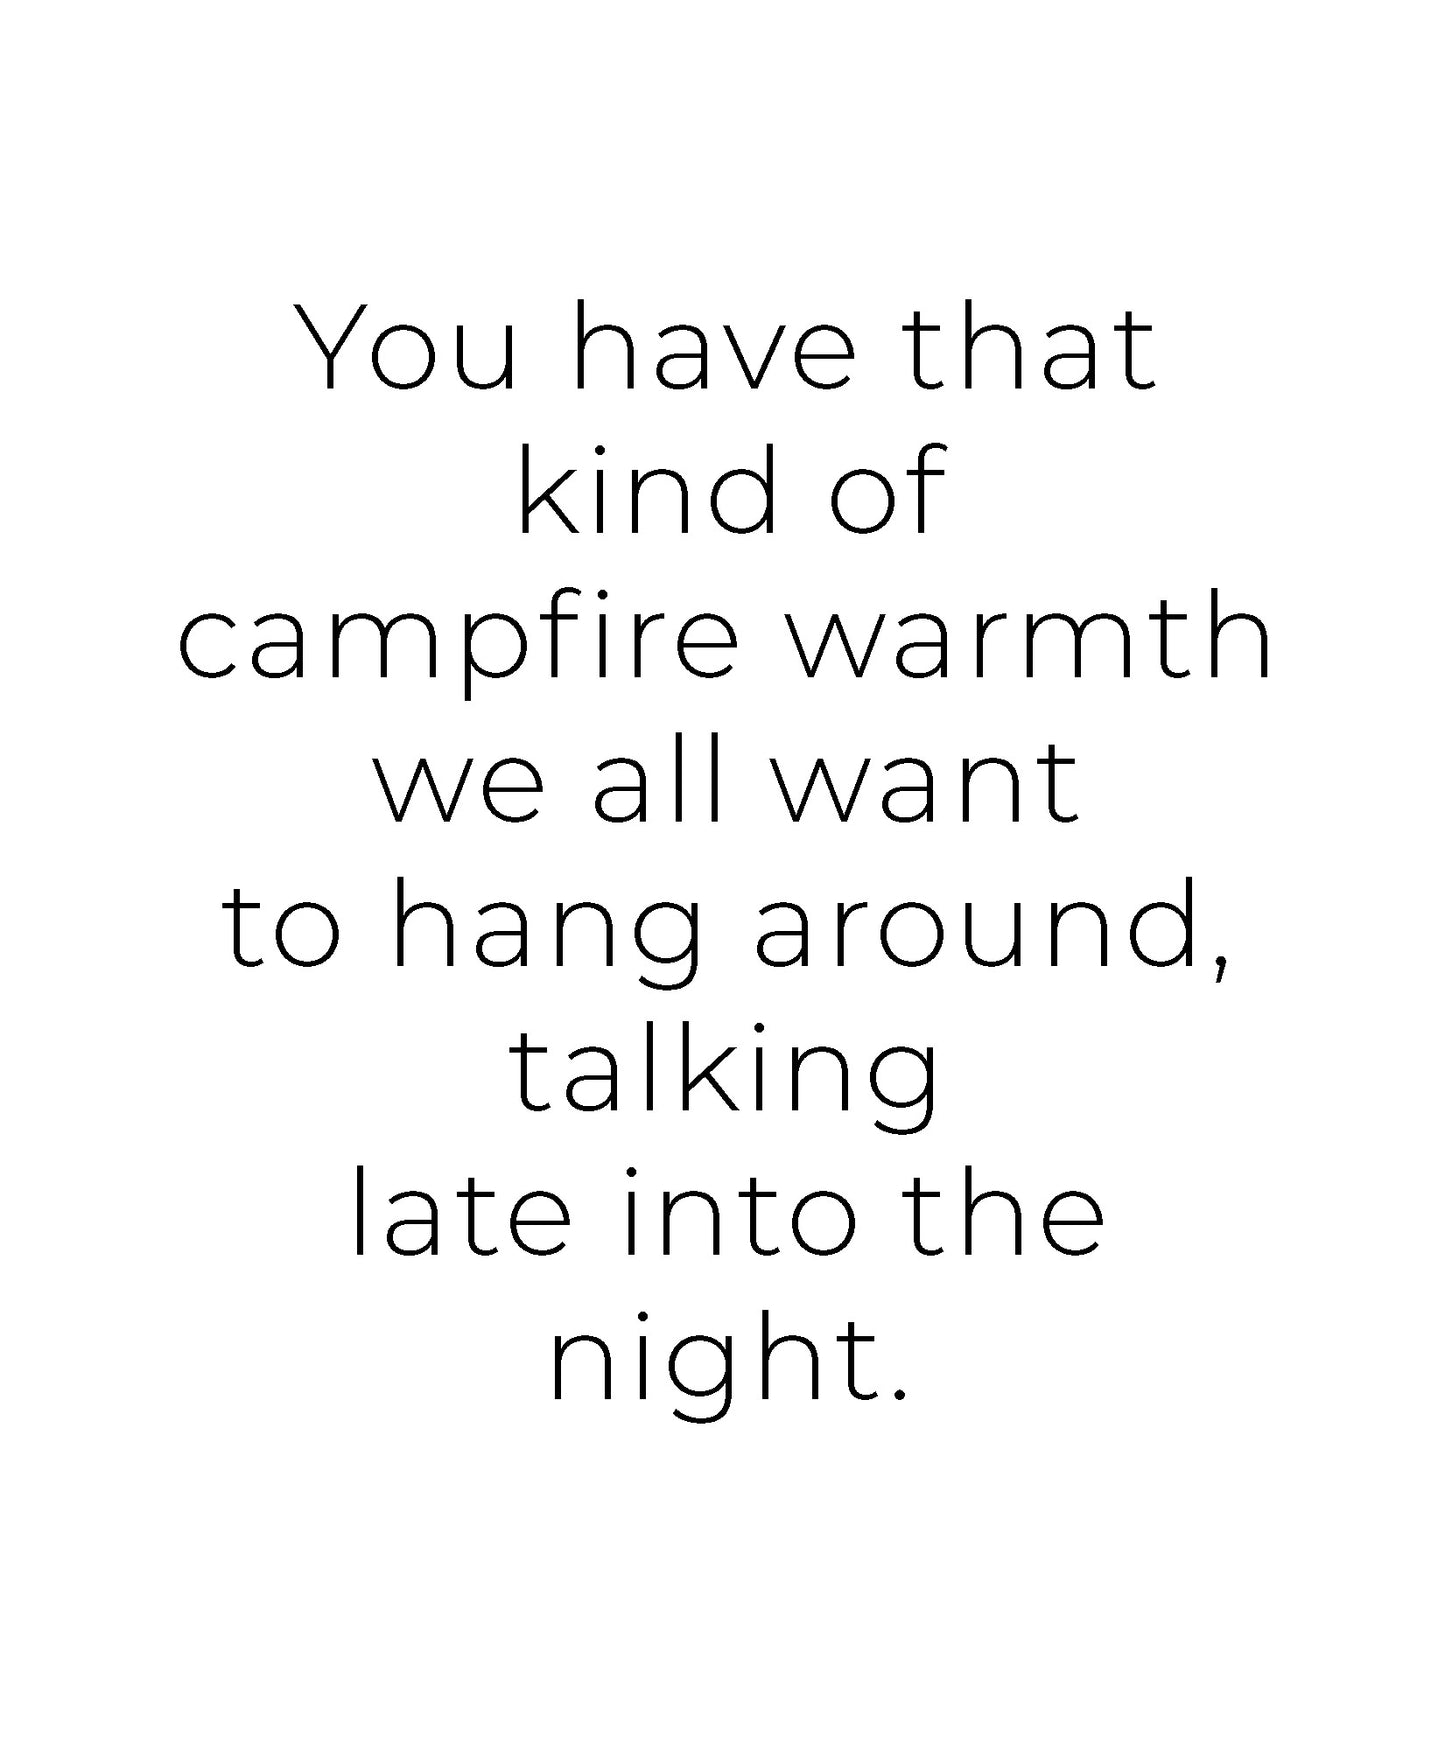 Campfire Card Pack of 6